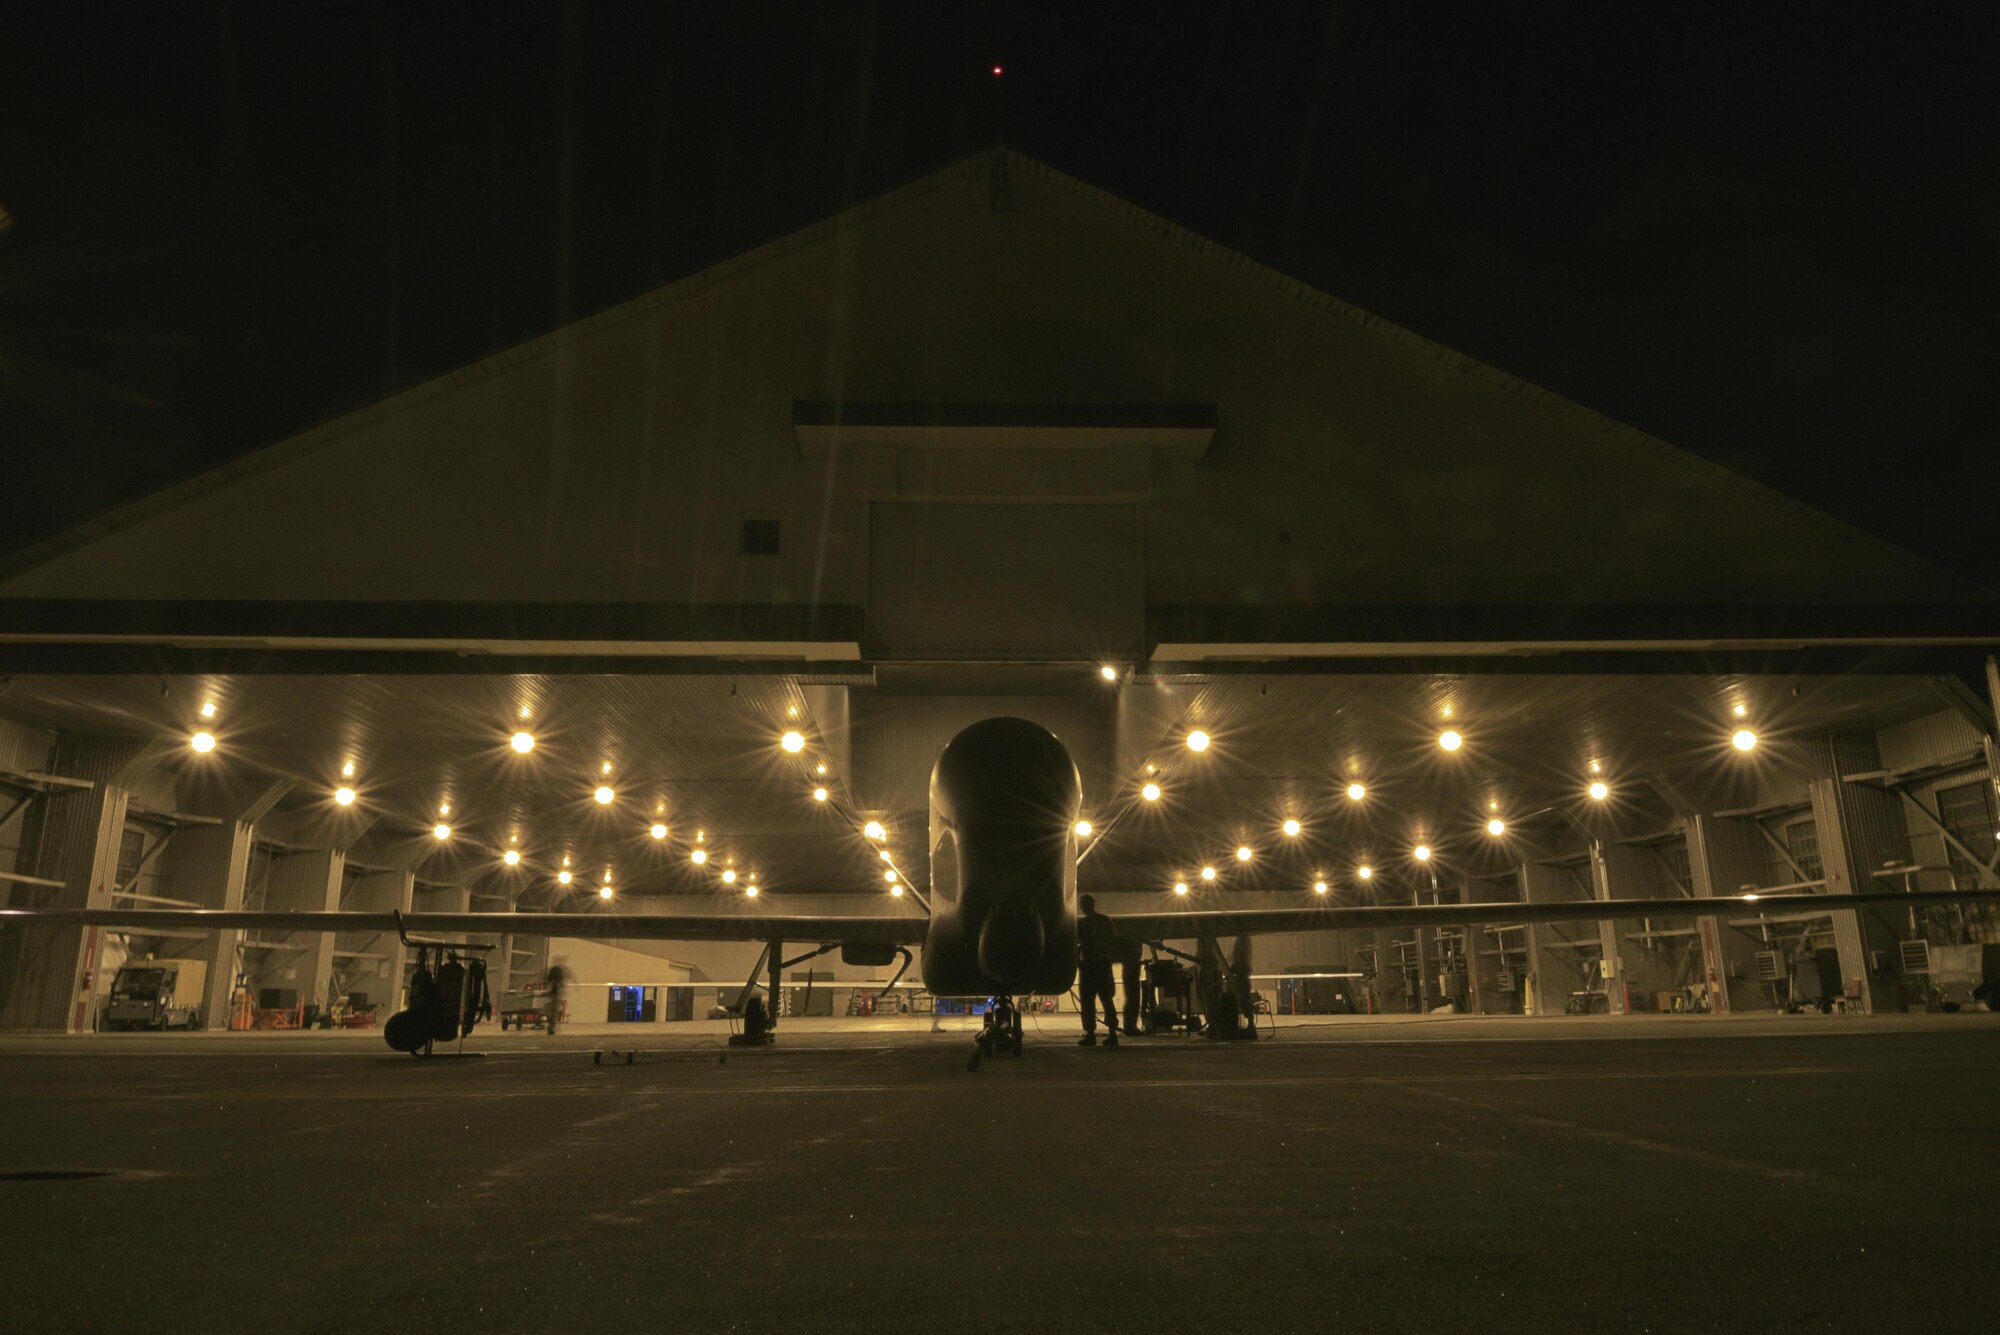 Maintainers from the 69th Maintenance Squadron perform an operations check on a RQ-4 Global Hawk at Misawa Air Base, Japan, Aug. 19, 2015. Before and after every RQ-4 flight, maintainers conduct an operations check and a 360-degree assessment of the unmanned aircraft to ensure there are no discrepancies. (U.S. Air Force photo by Senior Airman Jose L. Hernandez-Domitilo/Released)